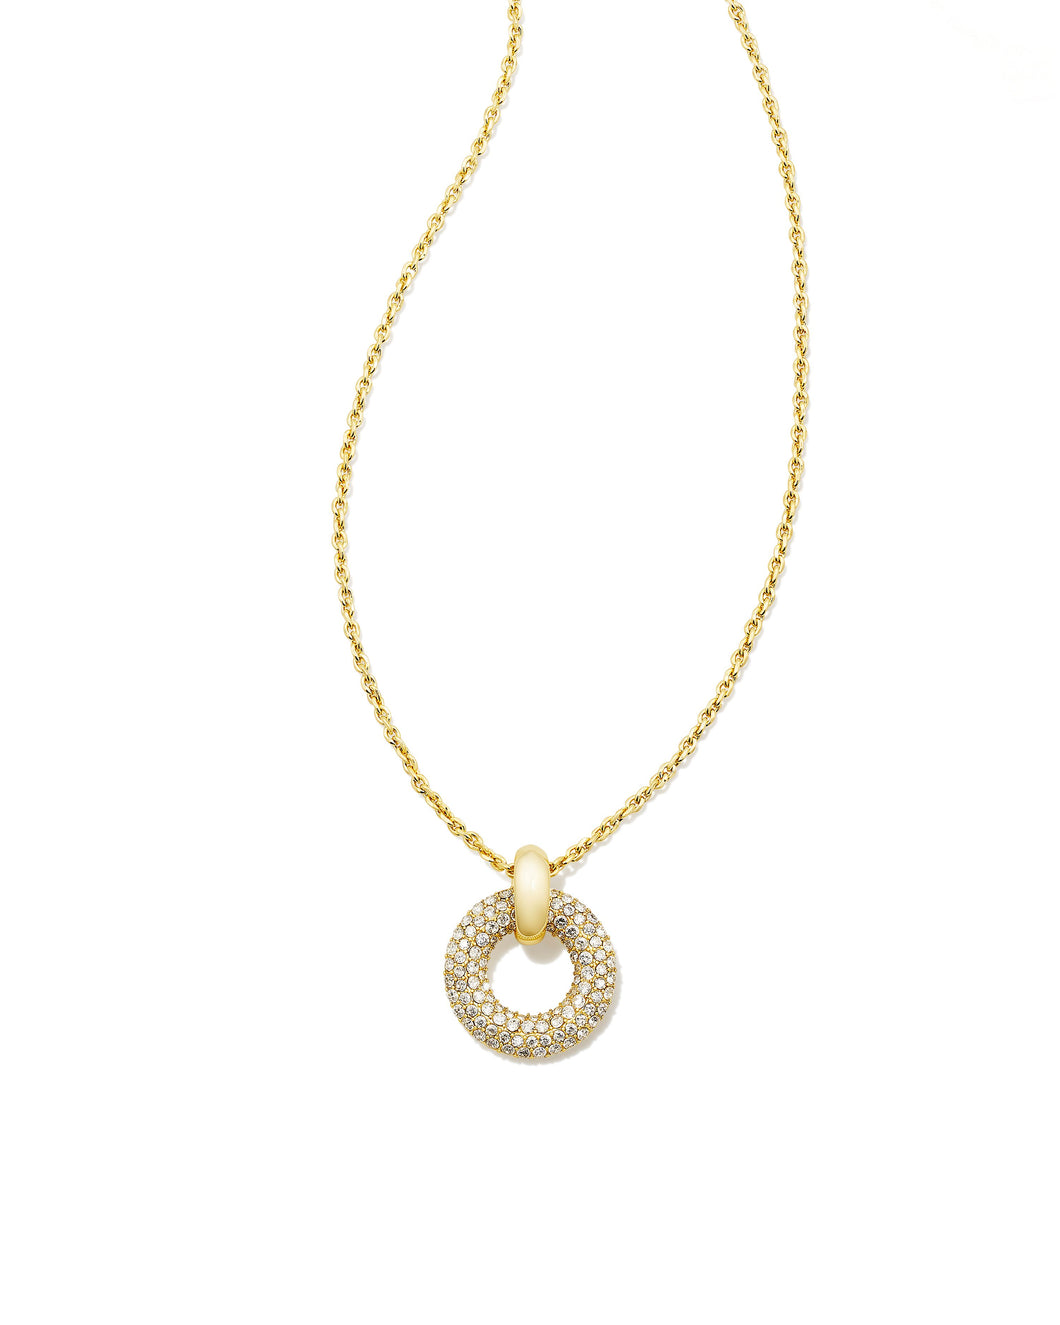 Kendra Scott Mikki Gold Pave Short Pendant Necklace in White Crystal